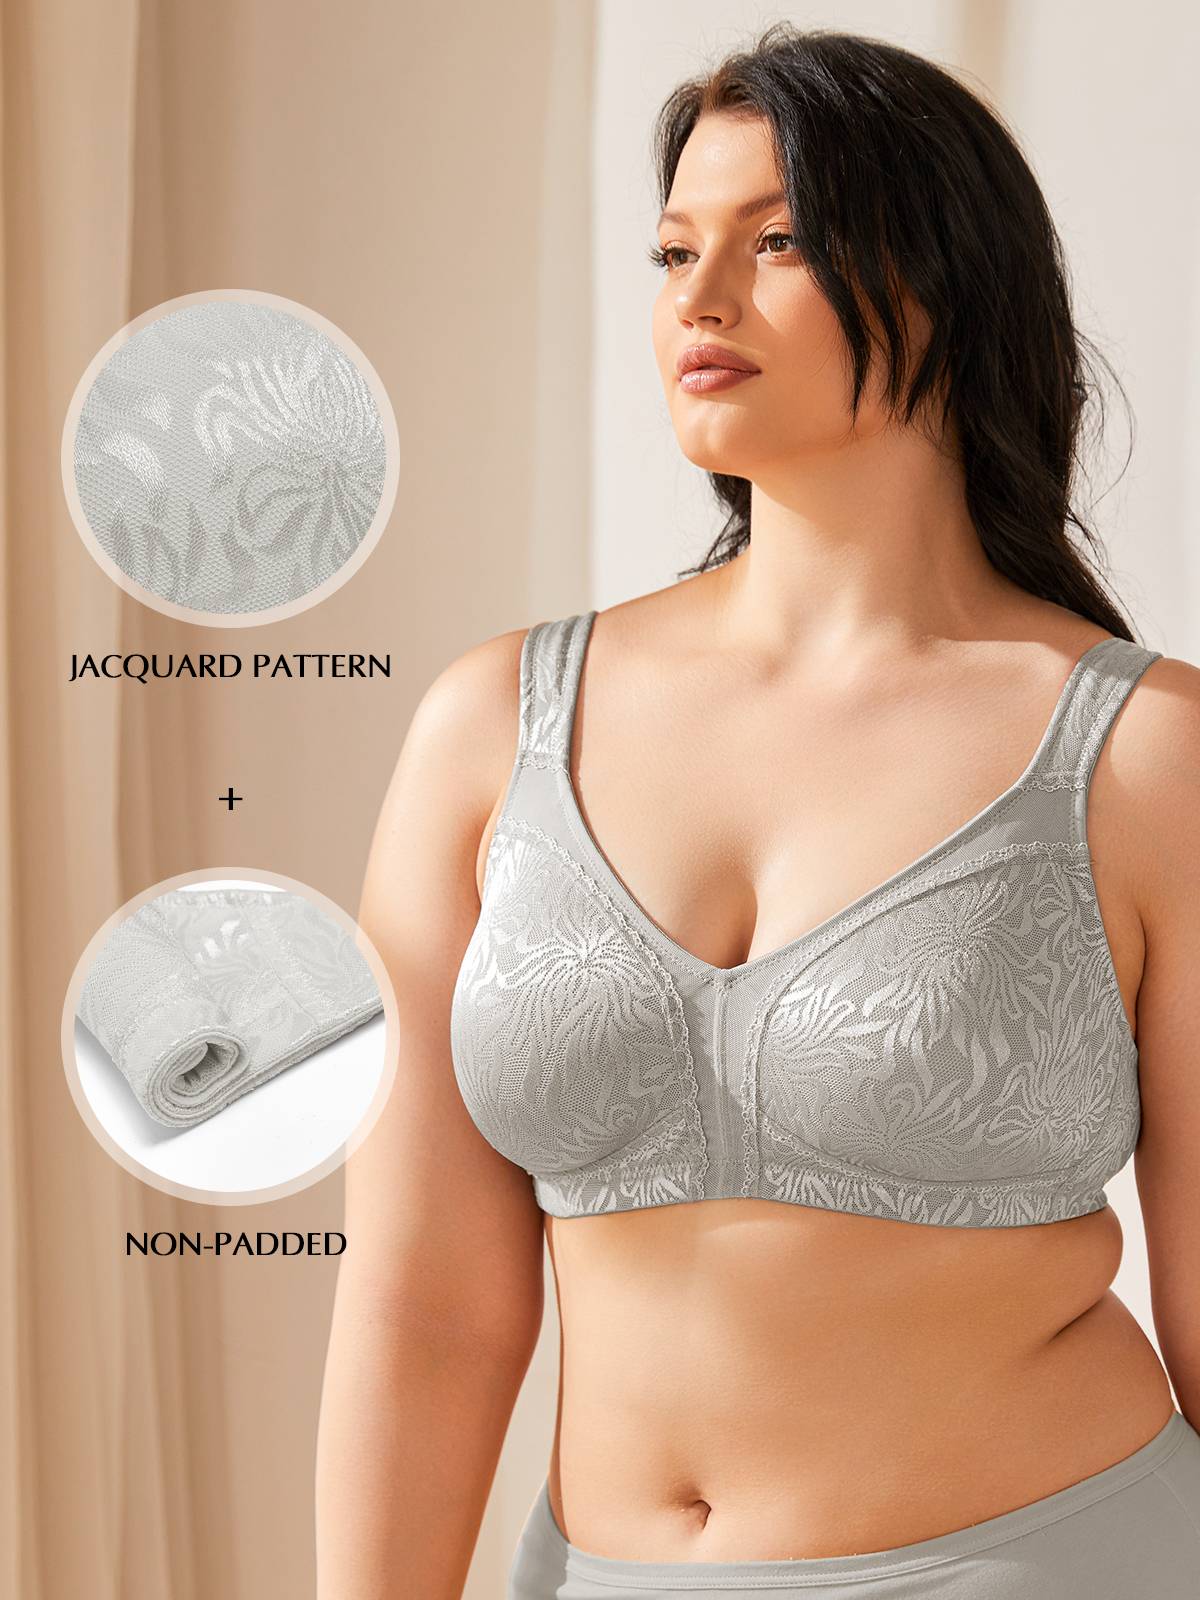 NEW silver color metal mesh bra. Fully adjustable. One size fits most.